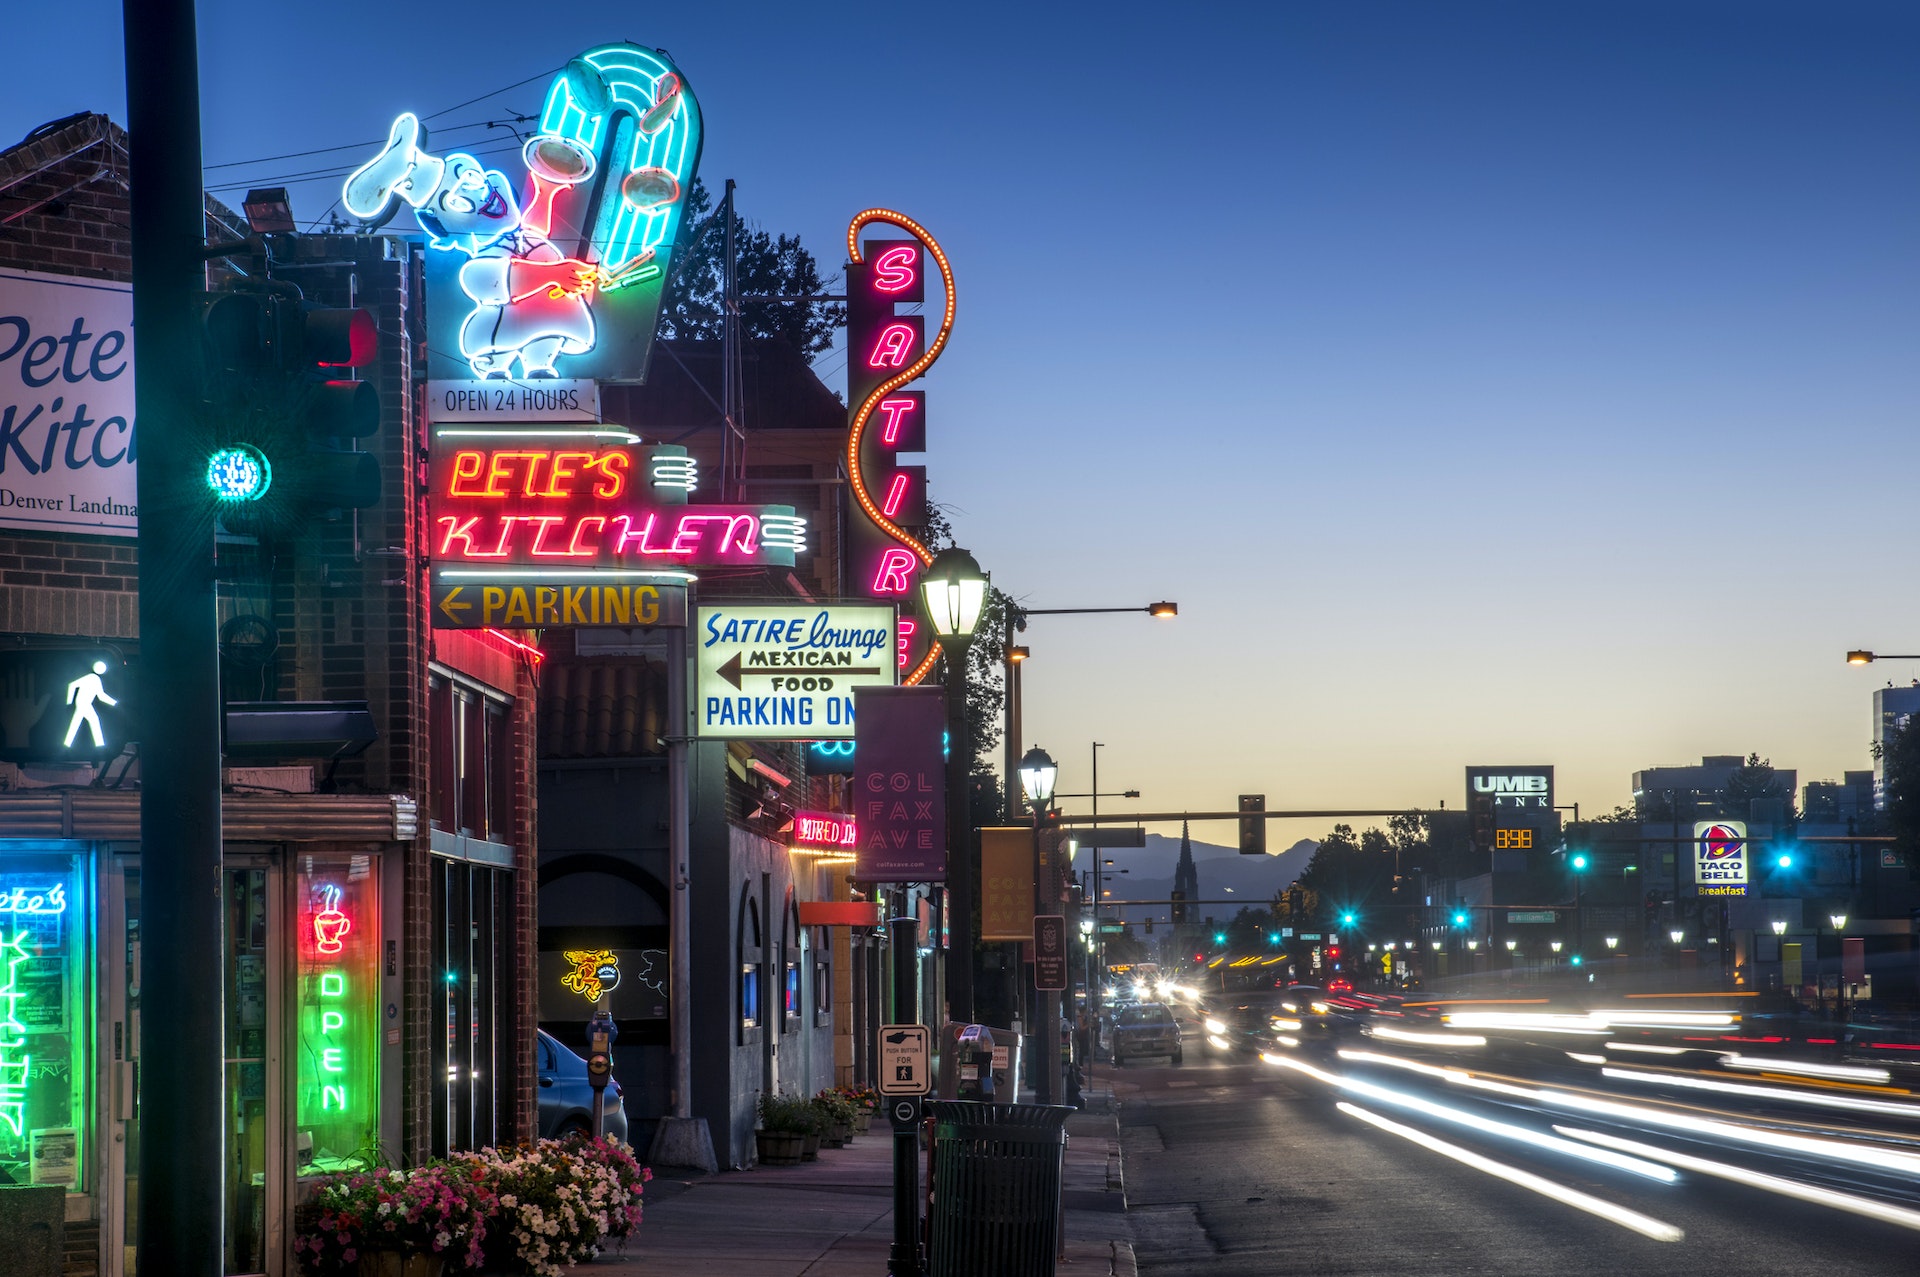 A strip of neon lights mark the way to a series of restaurants lining a road at night in a city